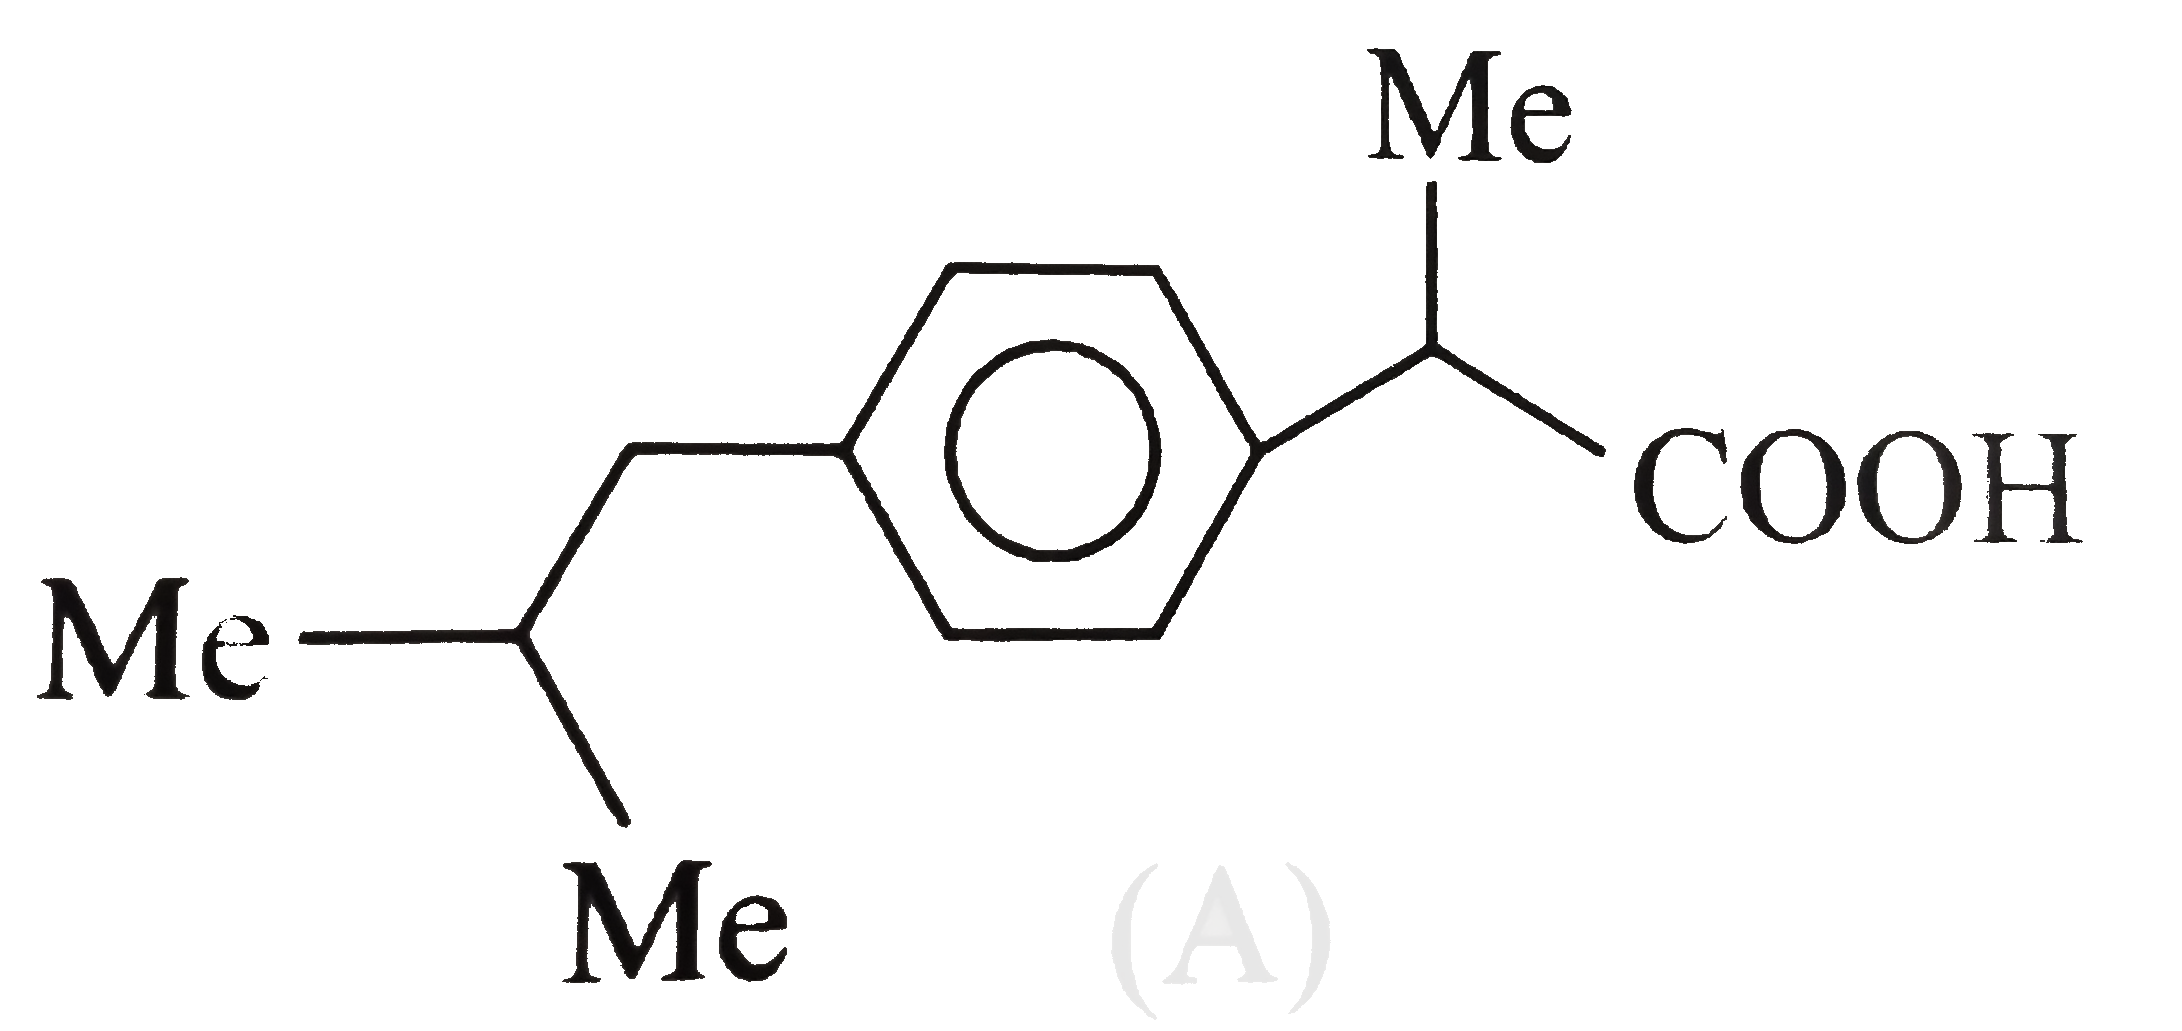 The analgesic drug ibuprofen (A) is chiral and exists in (+) and (-) froms. One enantiomer is physiologically active, while the other is inactive. The other is inactive. The structure of ibuprofen is given below.      The number of sigma-bonds in (A) is: